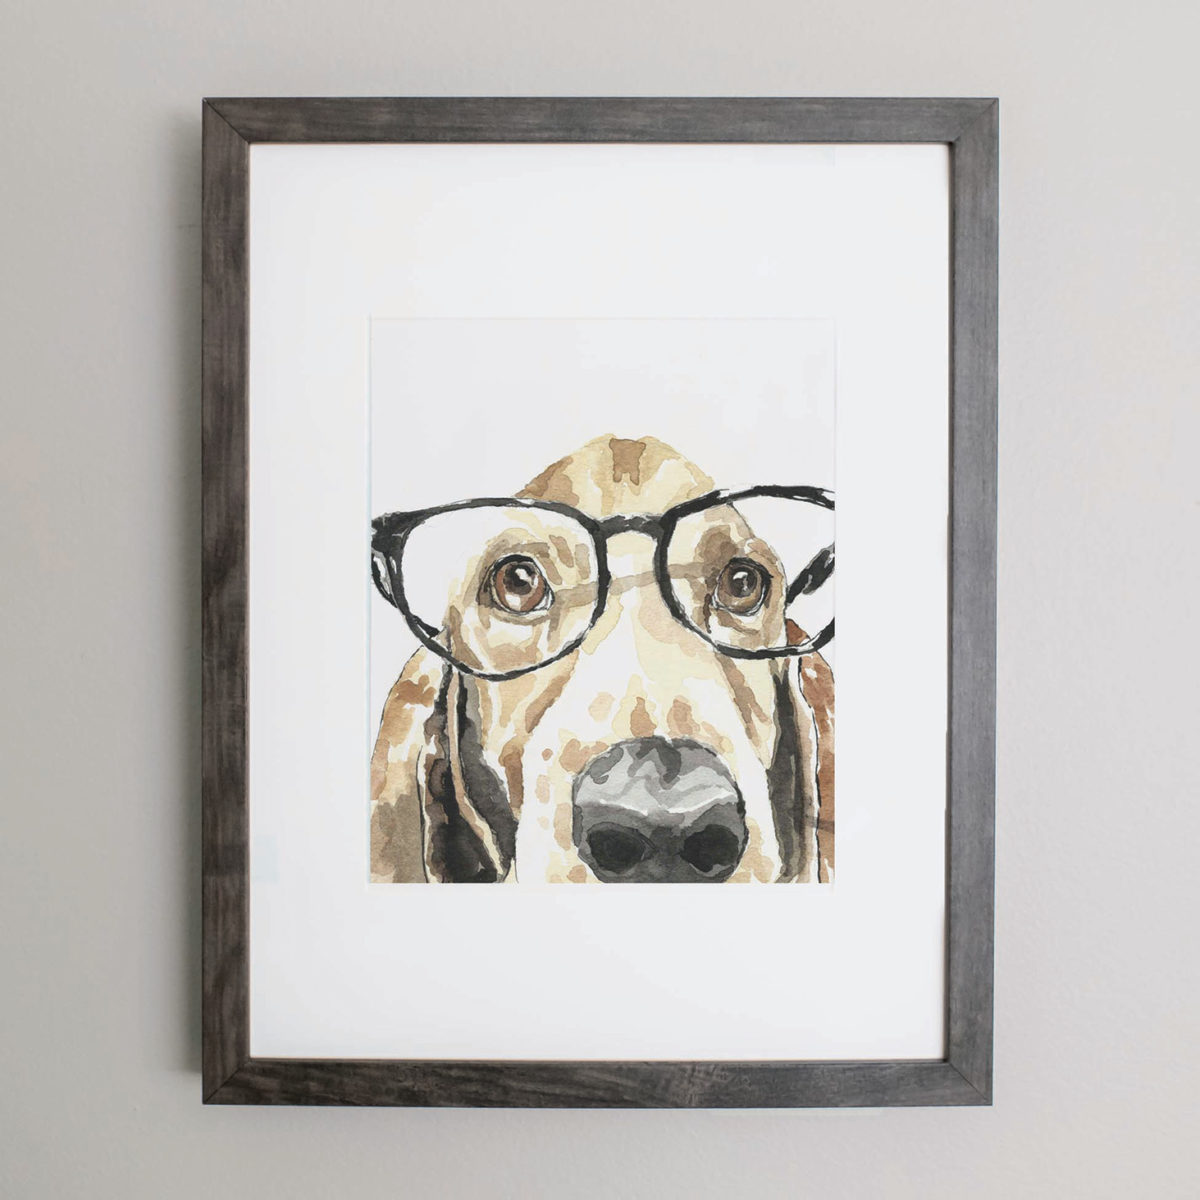 Watercolor of a Basset Hound wearing glasses in a gray frame